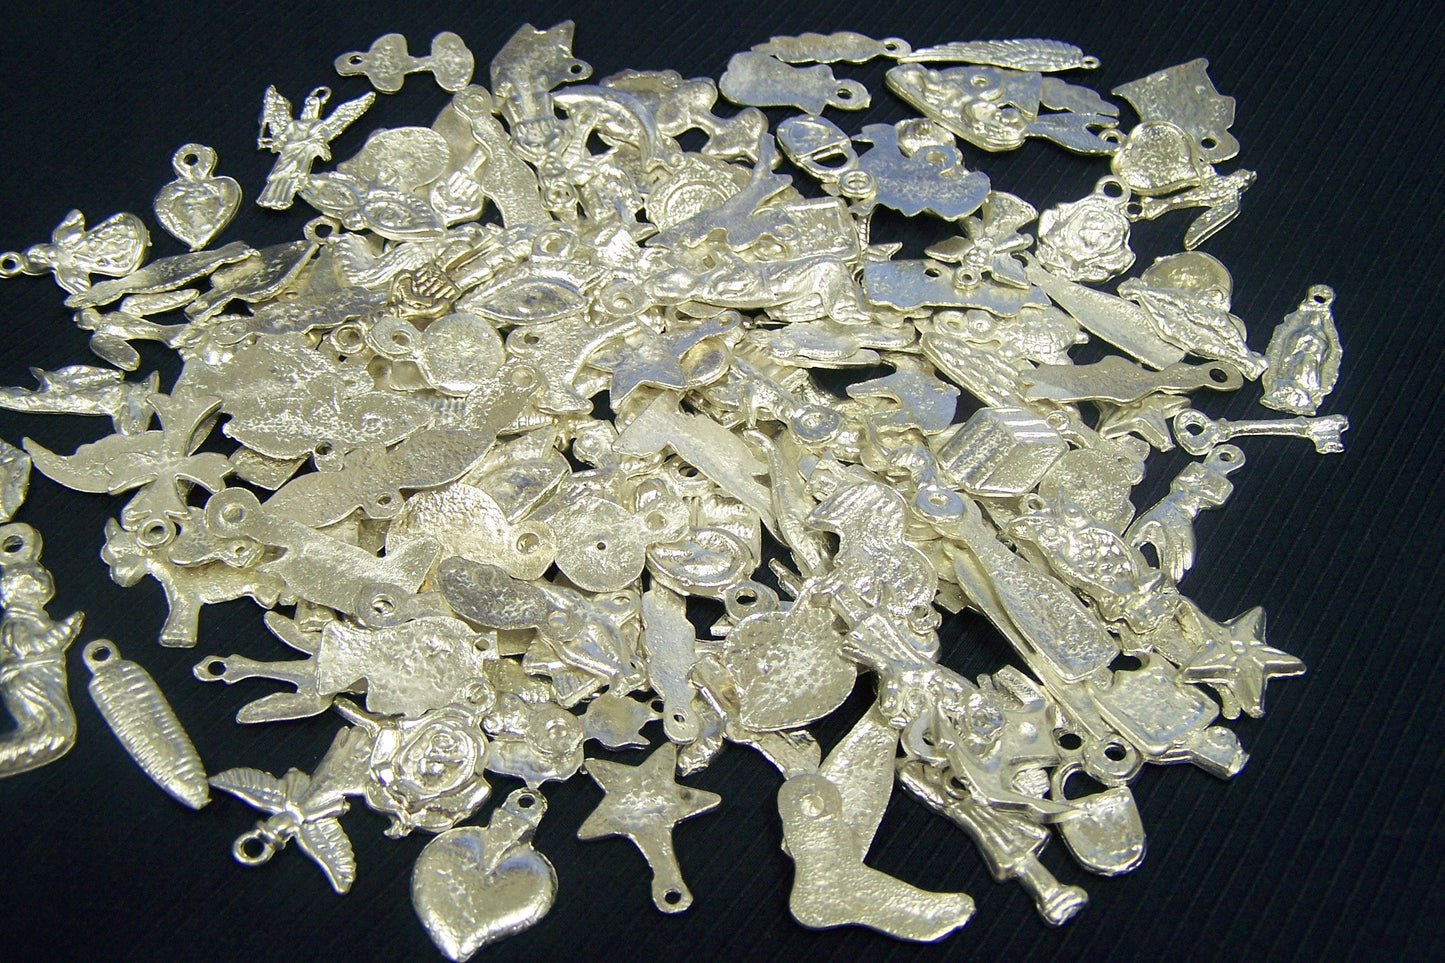 Lot of 50 All Different Shiny Silver-Colored Milagros, Mexico